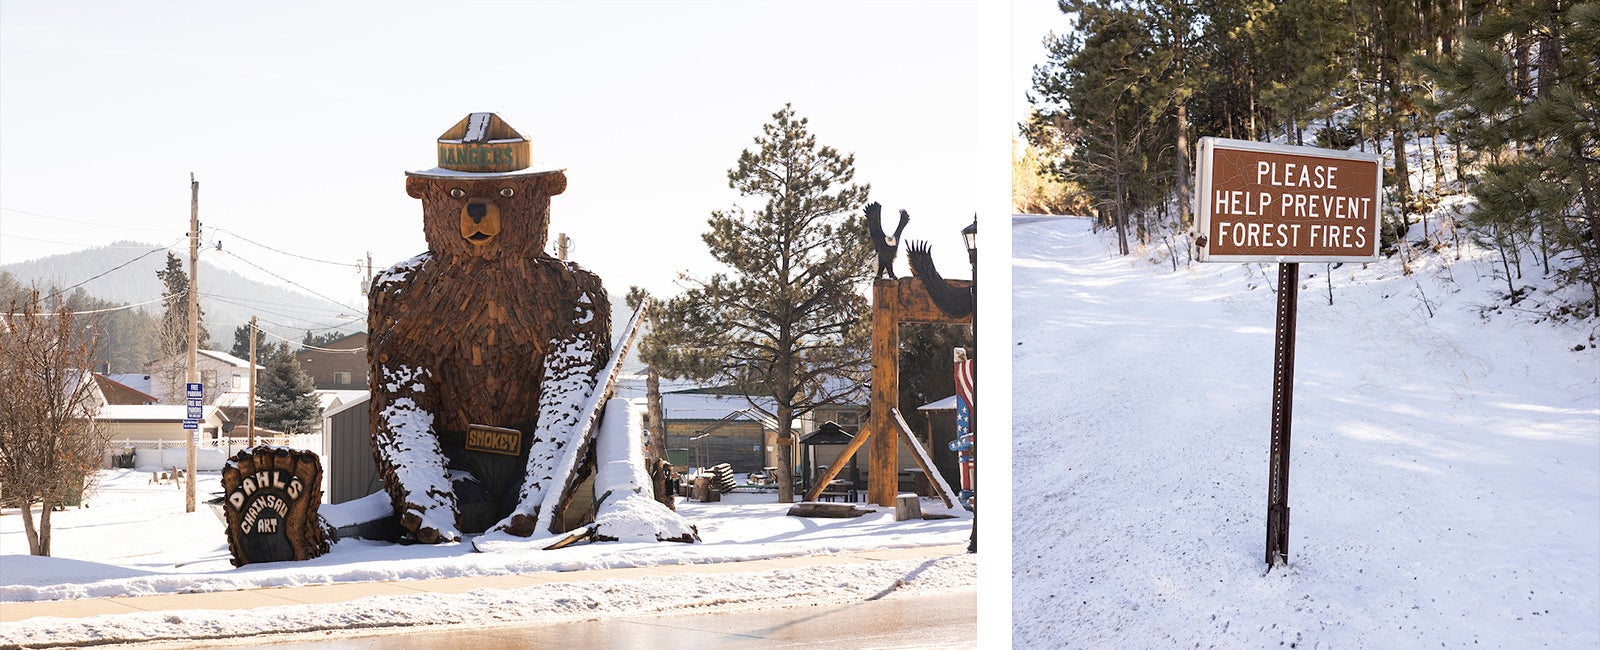 A towering sculpture of Smokey The Bear sitting in the snow and created from scraps of wood, wearing a wooden hat that says “Rangers” in Hill City, South Dakota next to a sign that says “Please help prevent forest fires”